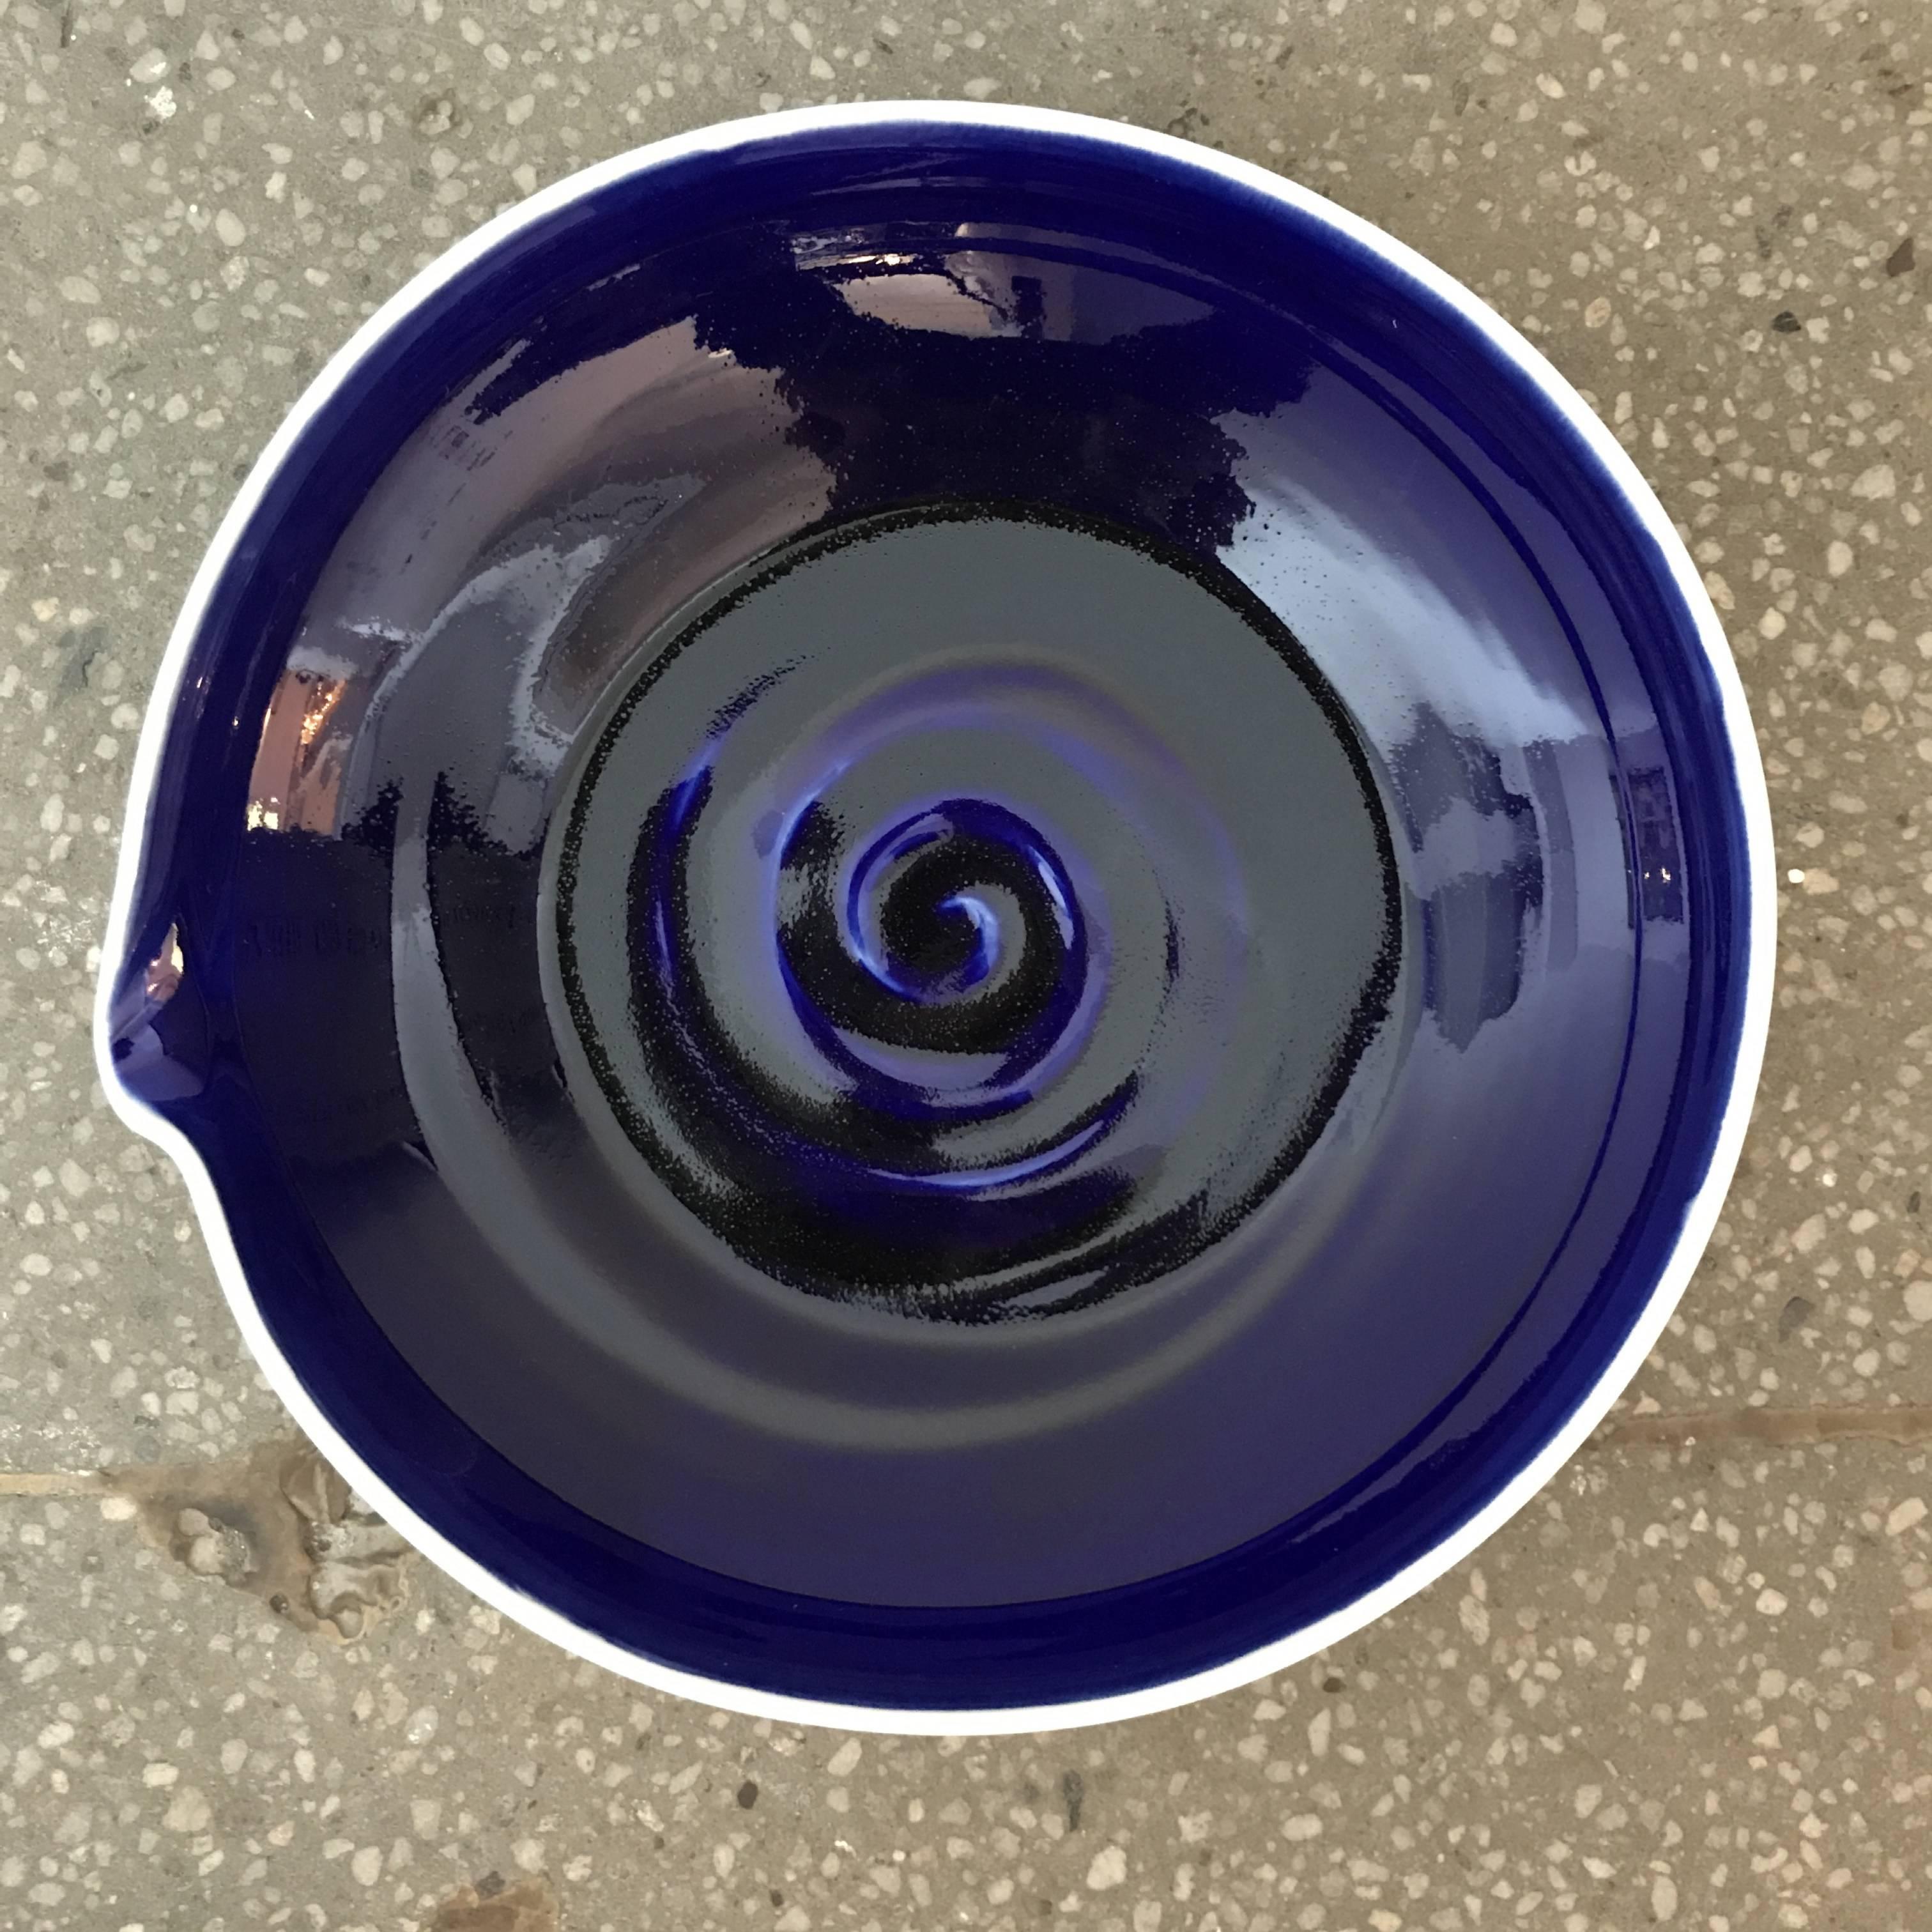 Hand-thrown blue and white ceramic Studio Pottery bowls created by a local artisan in Jaffa Israel. 
Indigo blue interior with white exterior. Subtle bend detail on the rim of each bowl. Intricate graphics and artist signature on the bottom. 13